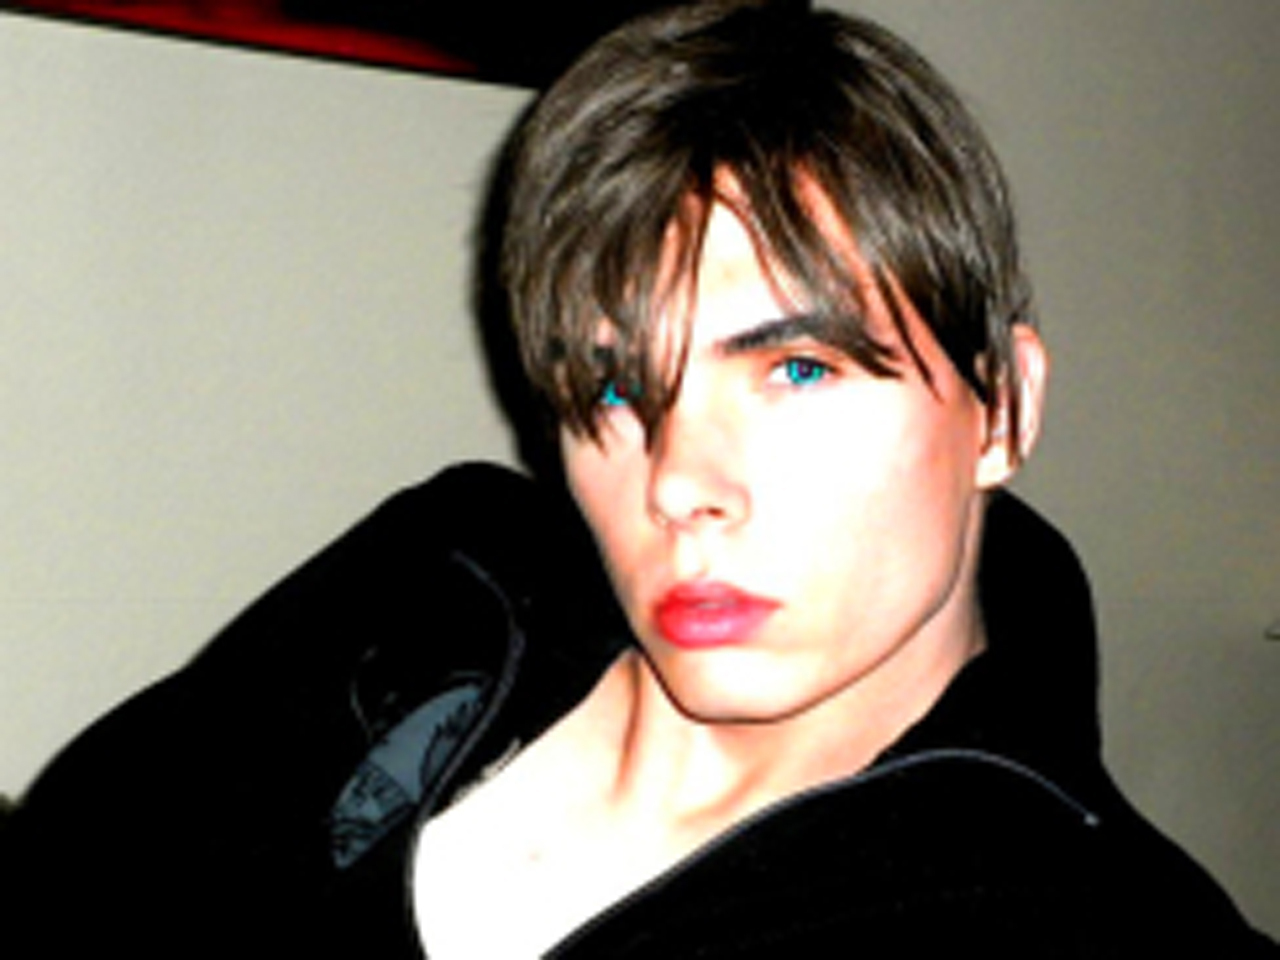 Luka Rocco Magnotta Case Family Of Dismembered Man Jun Lin Arrives In Canada To Claim His Remains Cbs News